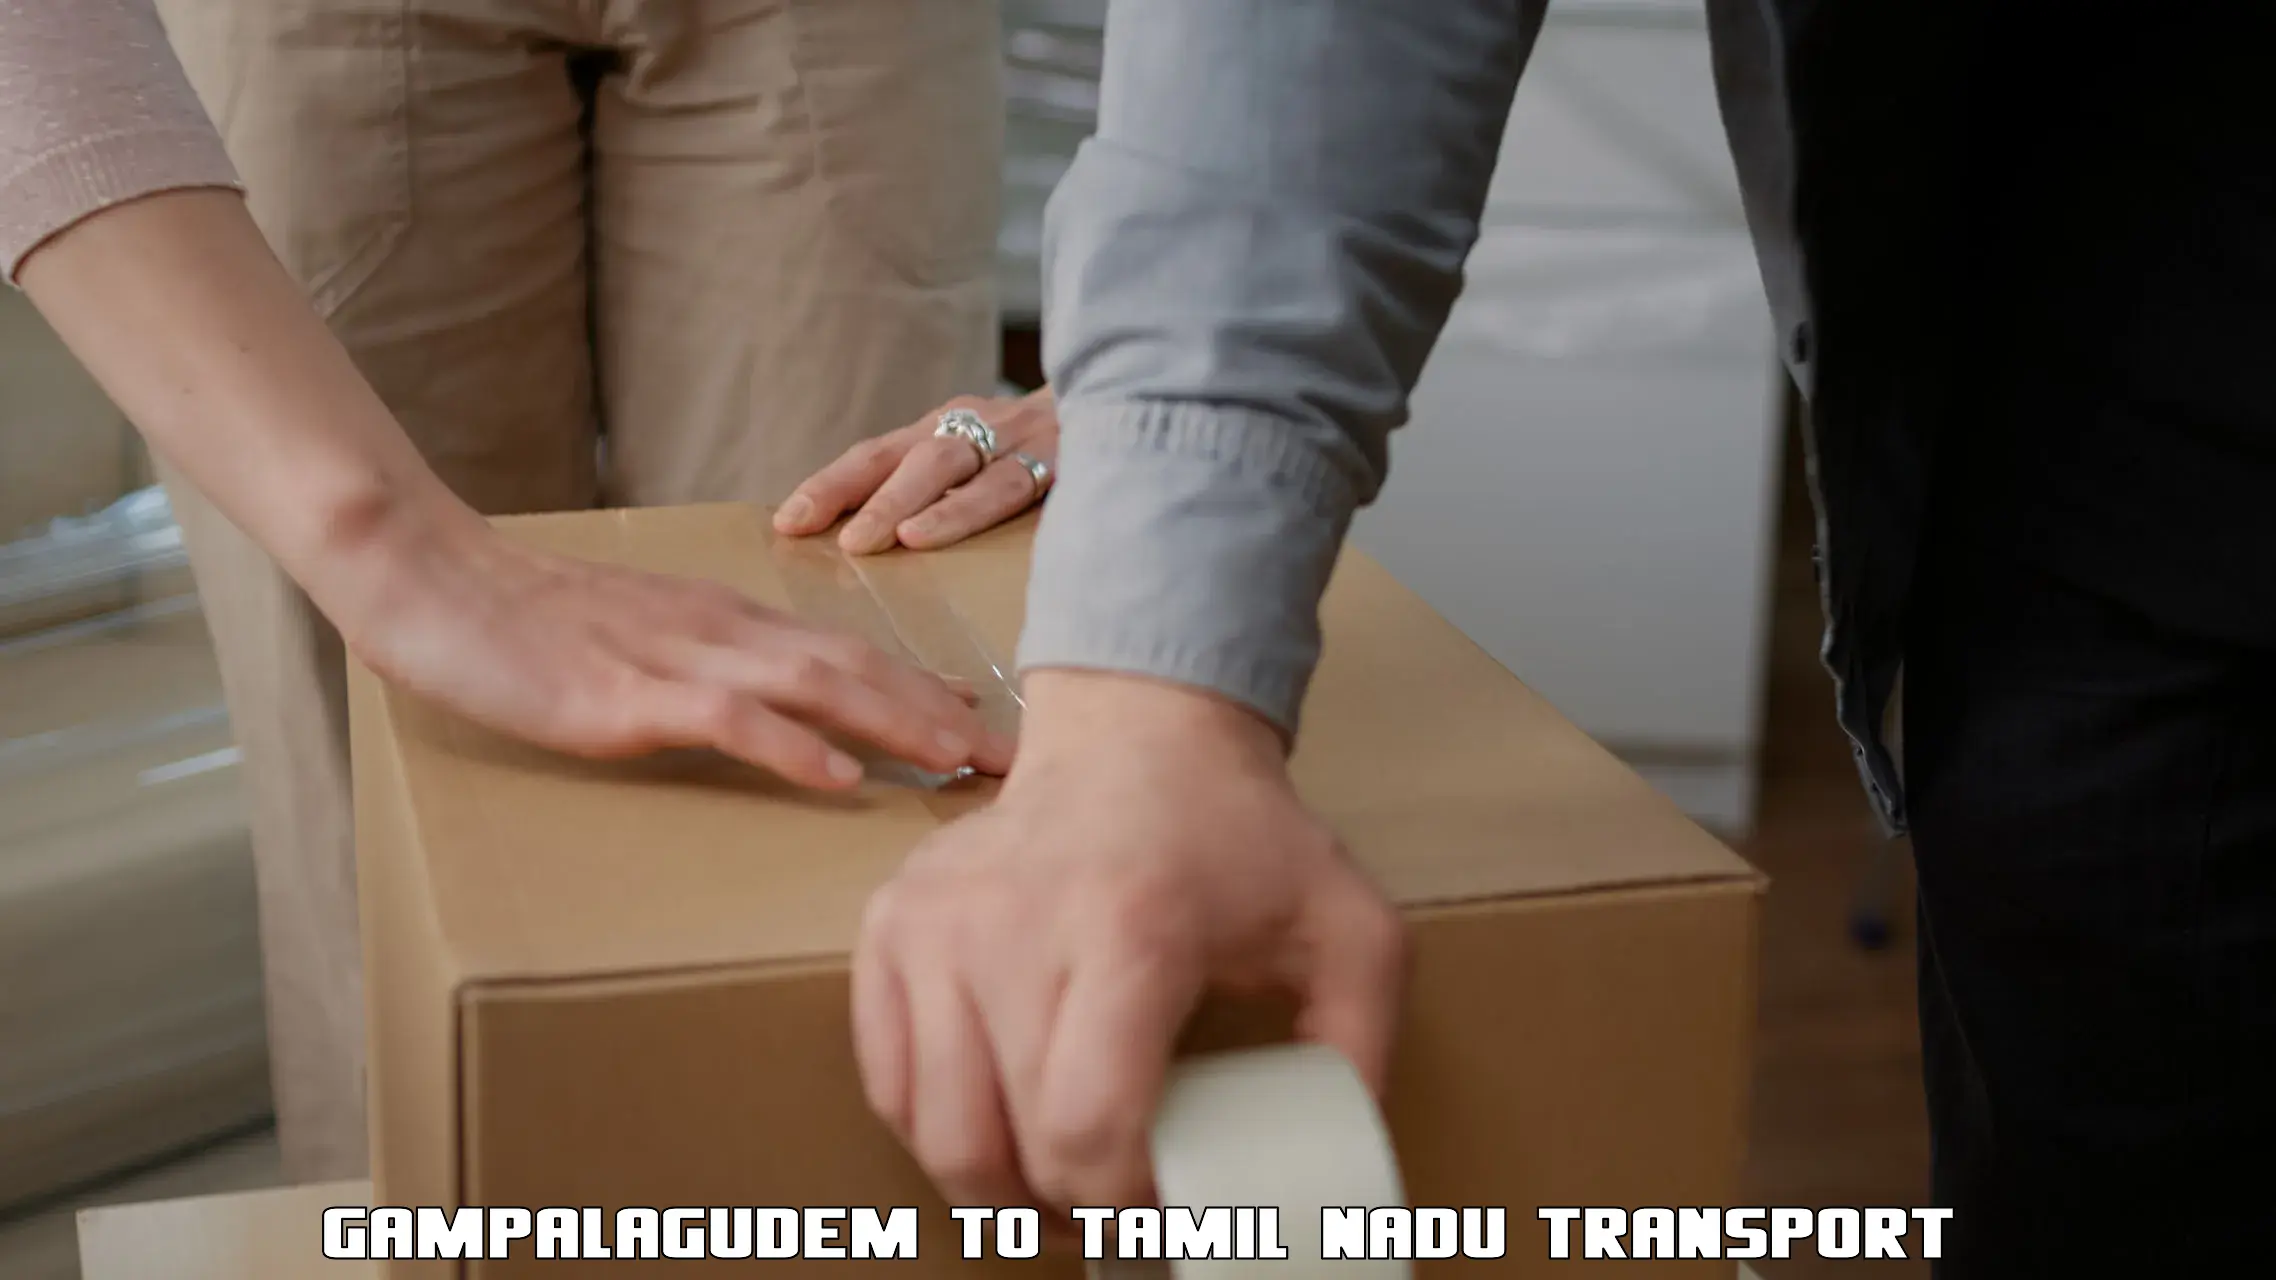 Vehicle transport services Gampalagudem to Trichy